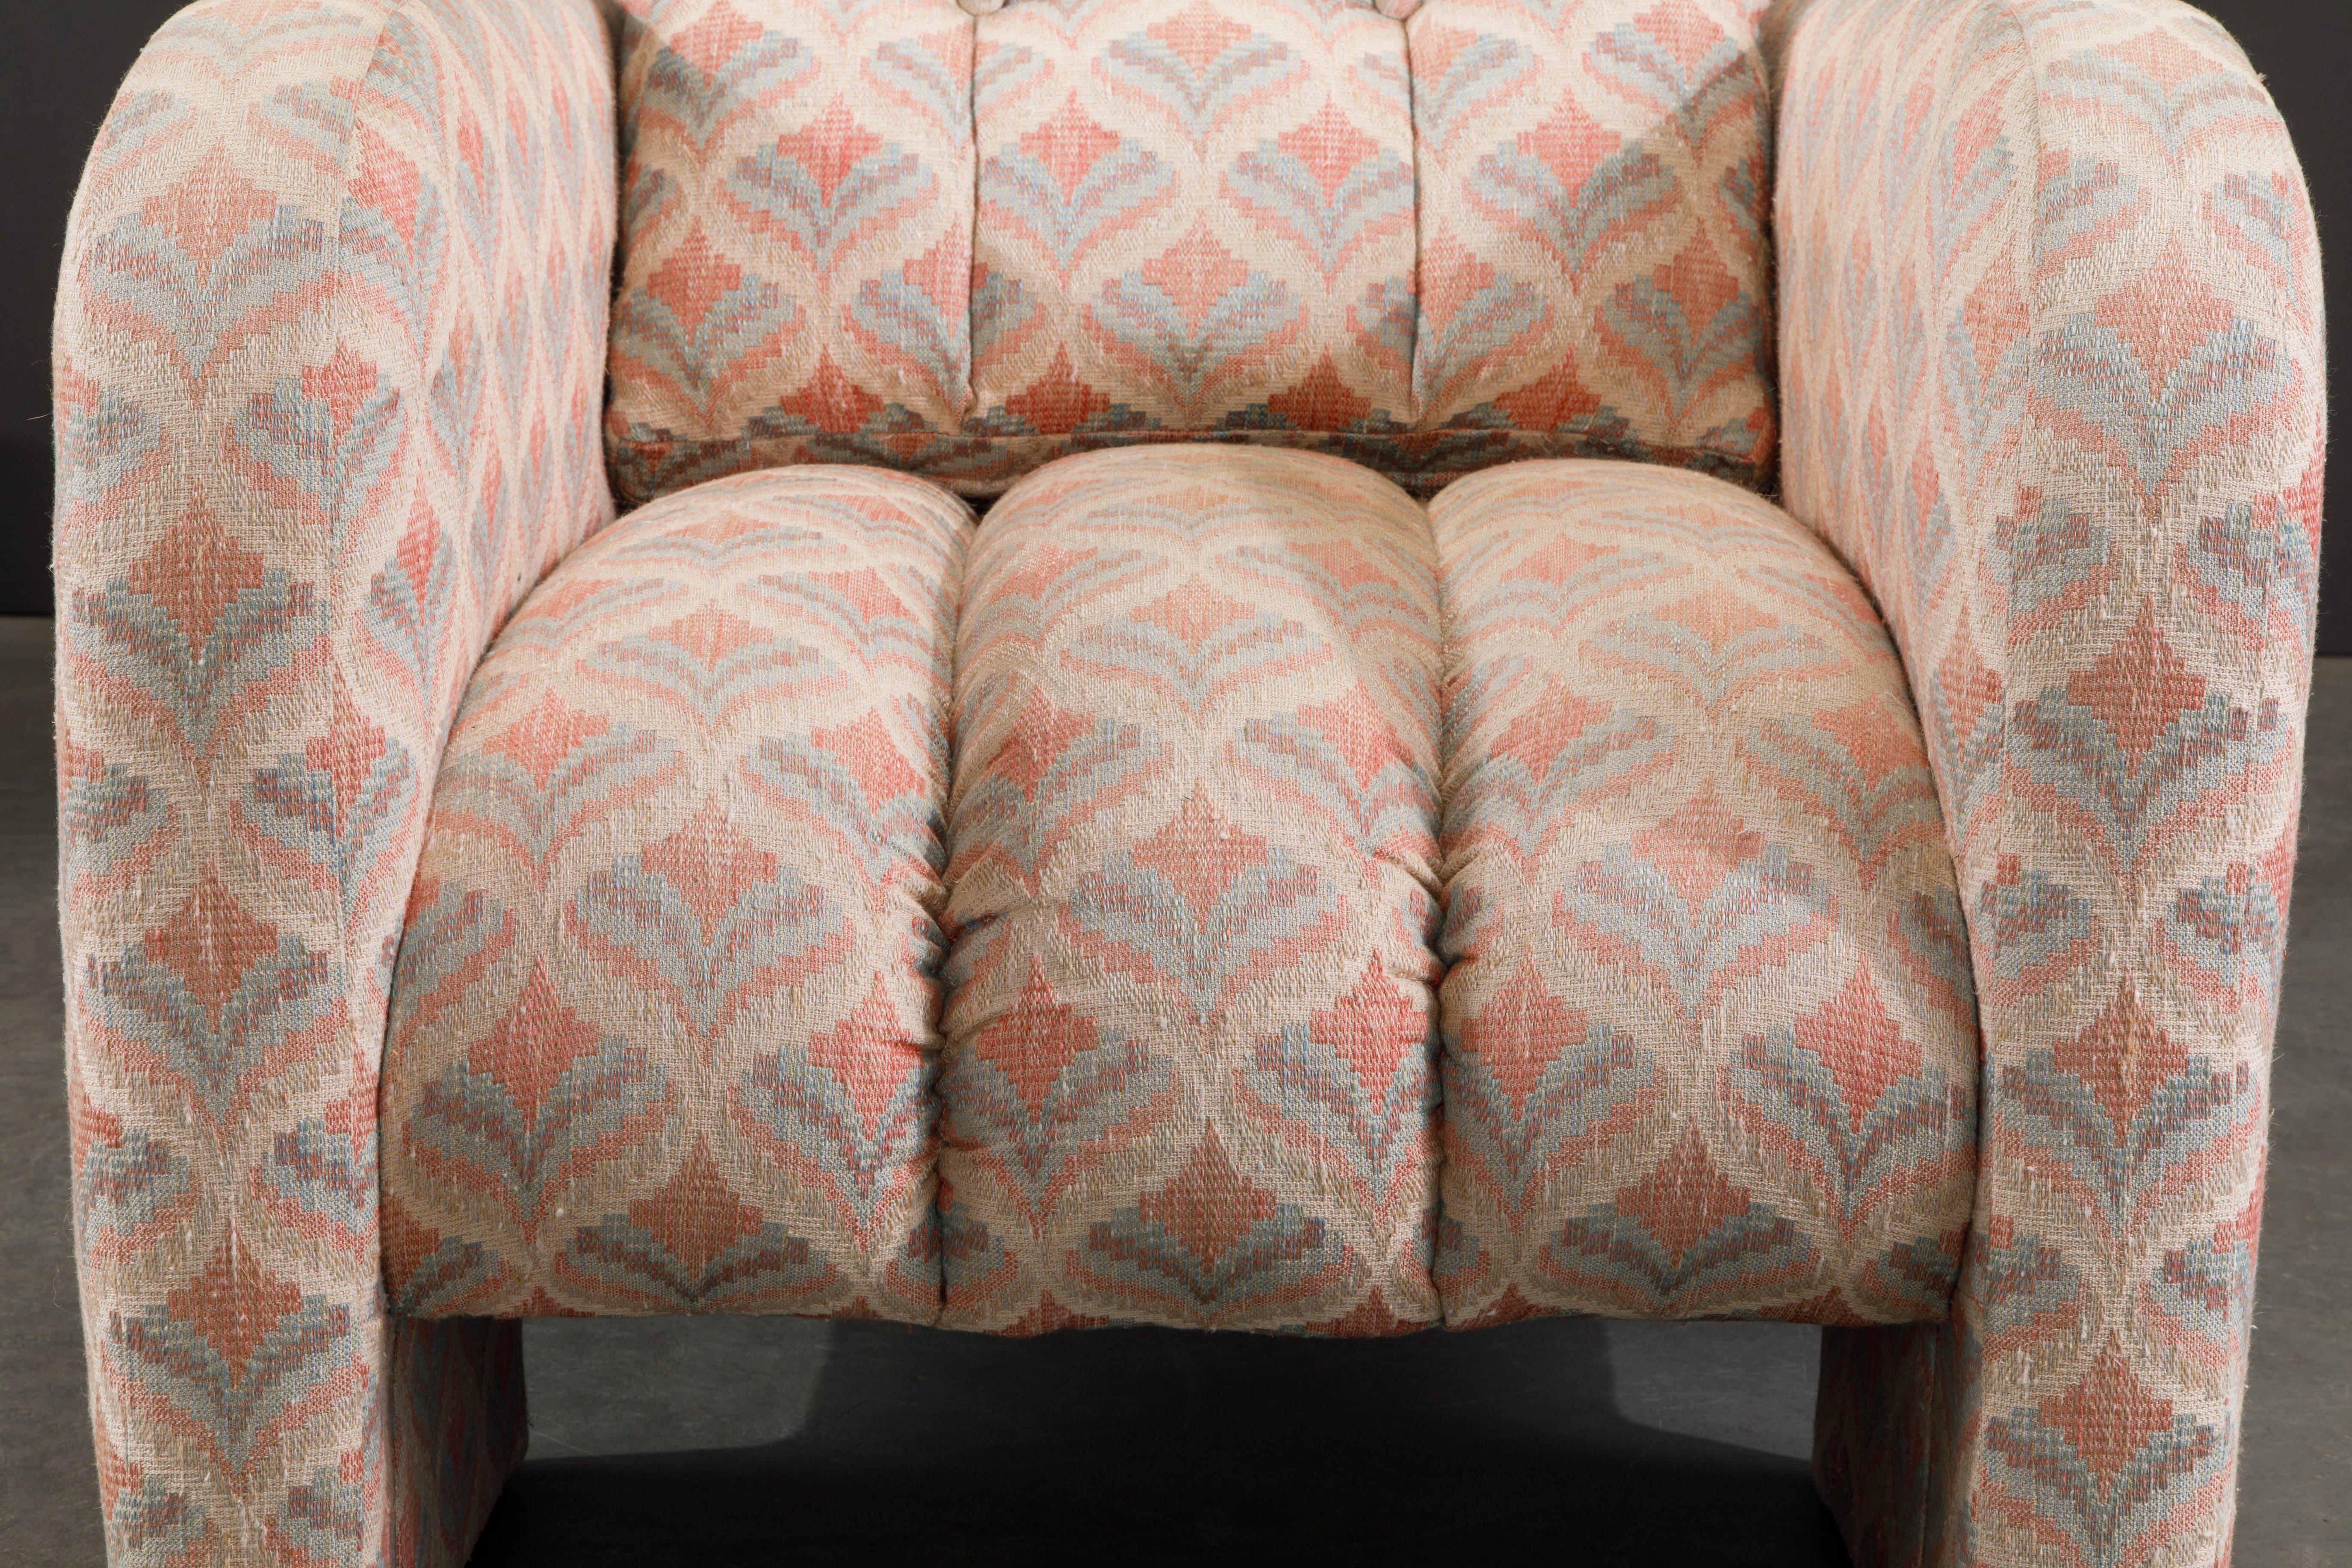 Post-Modern Channel Tufted Lounge Chairs, Attributed to Vladimir Kagan, 1980s For Sale 6